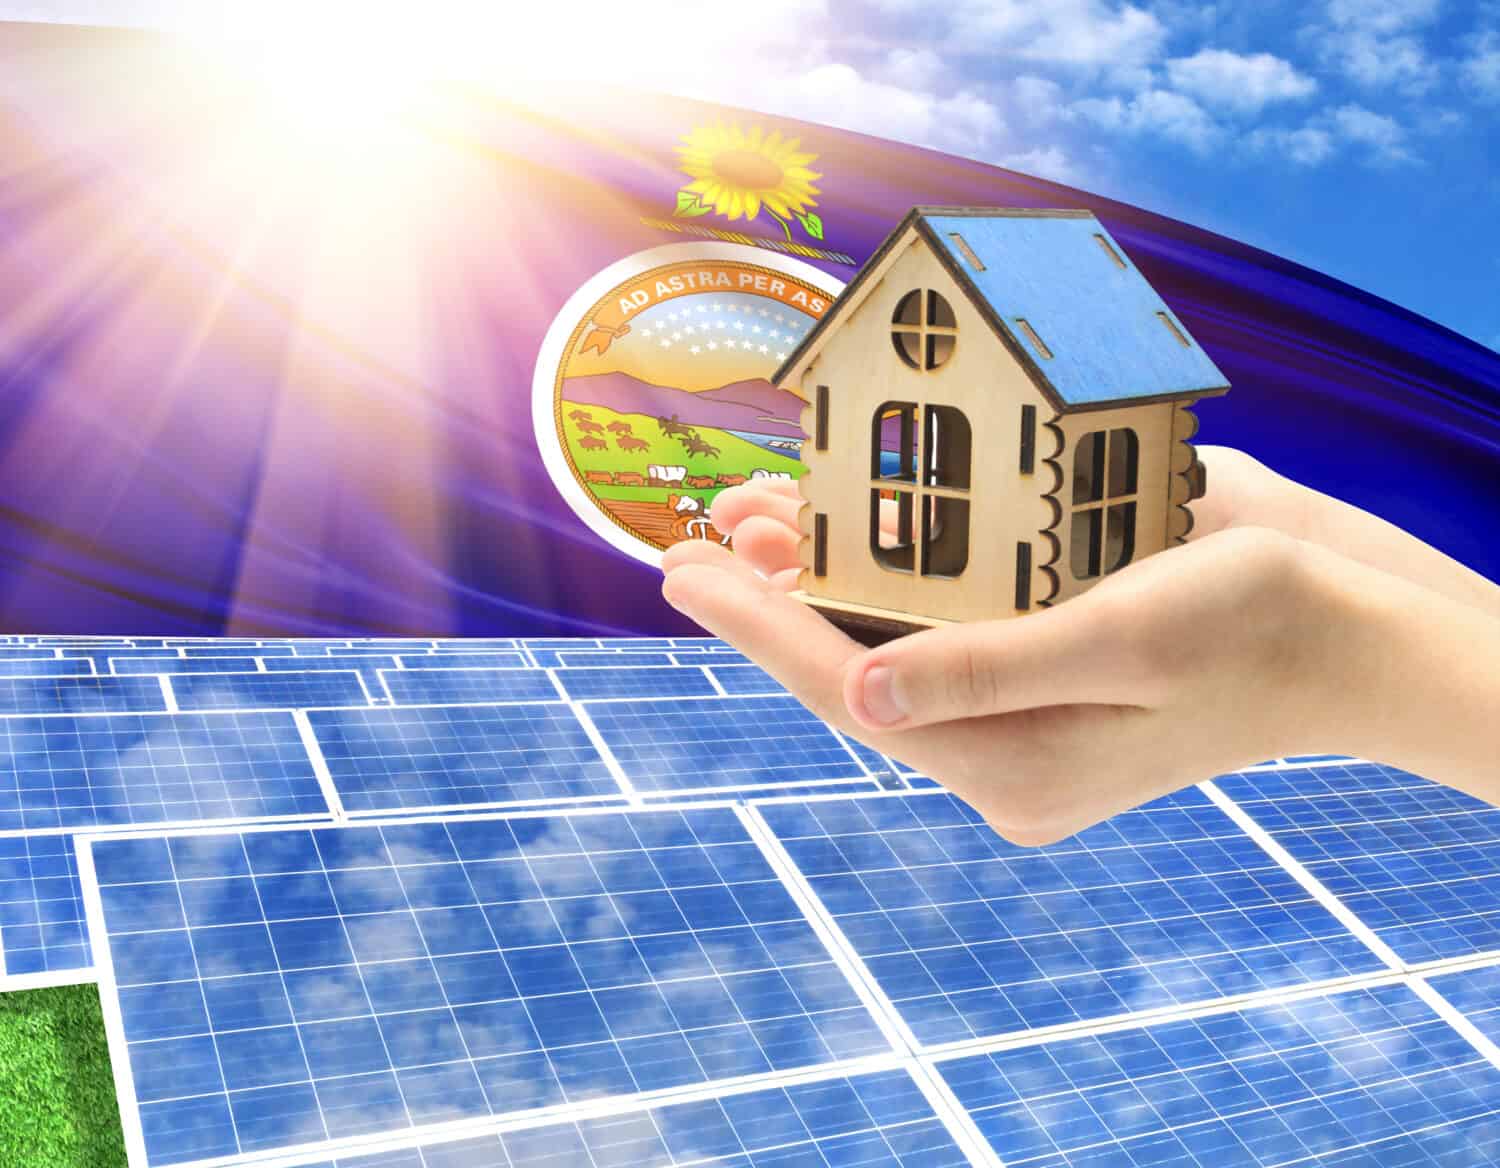 The photo with solar panels and a woman's palm holding a toy house shows the flag State of Kansas in the sun.